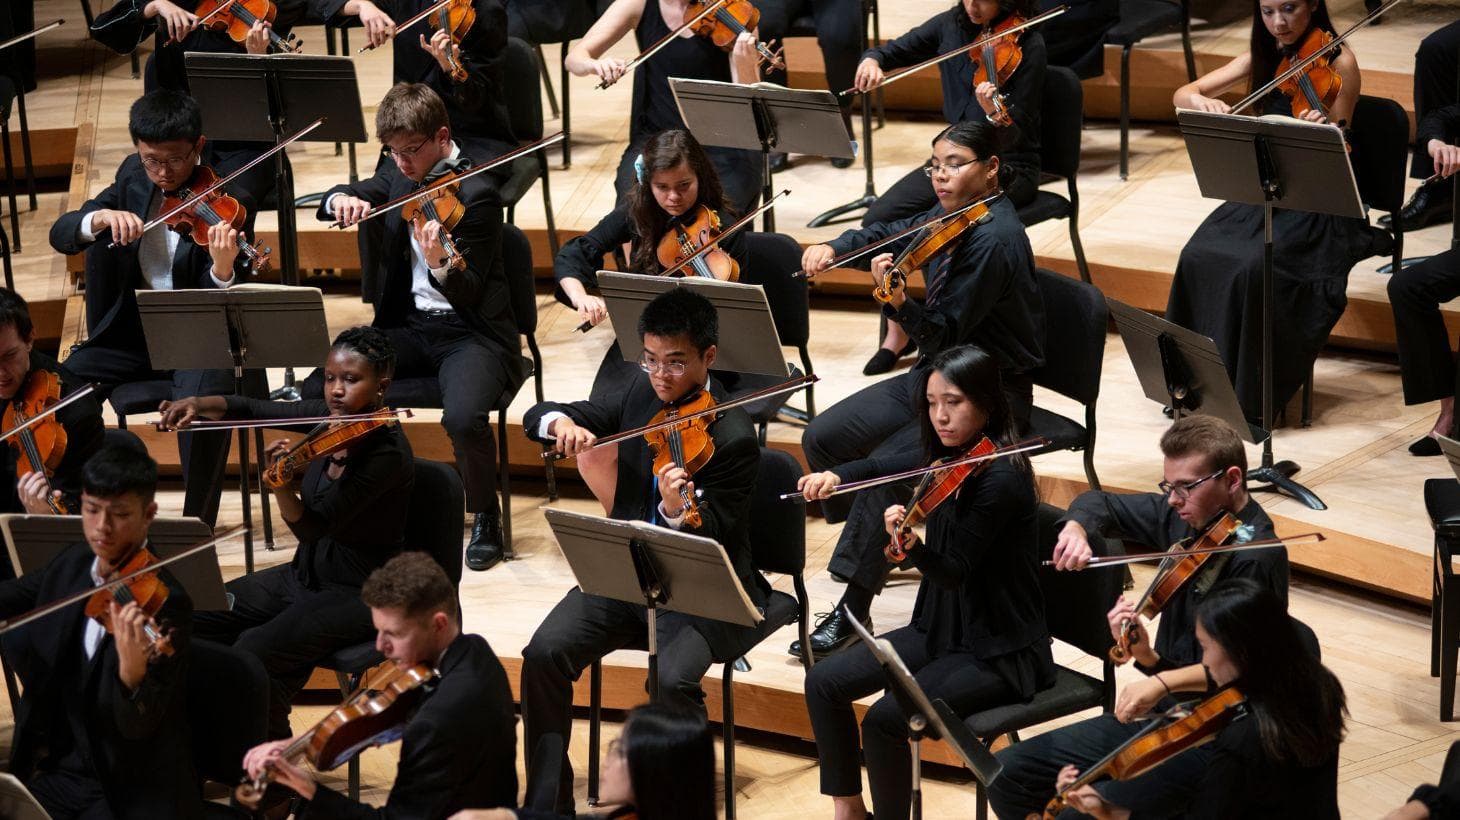 UMD Symphony Orchestra students perform on stage.